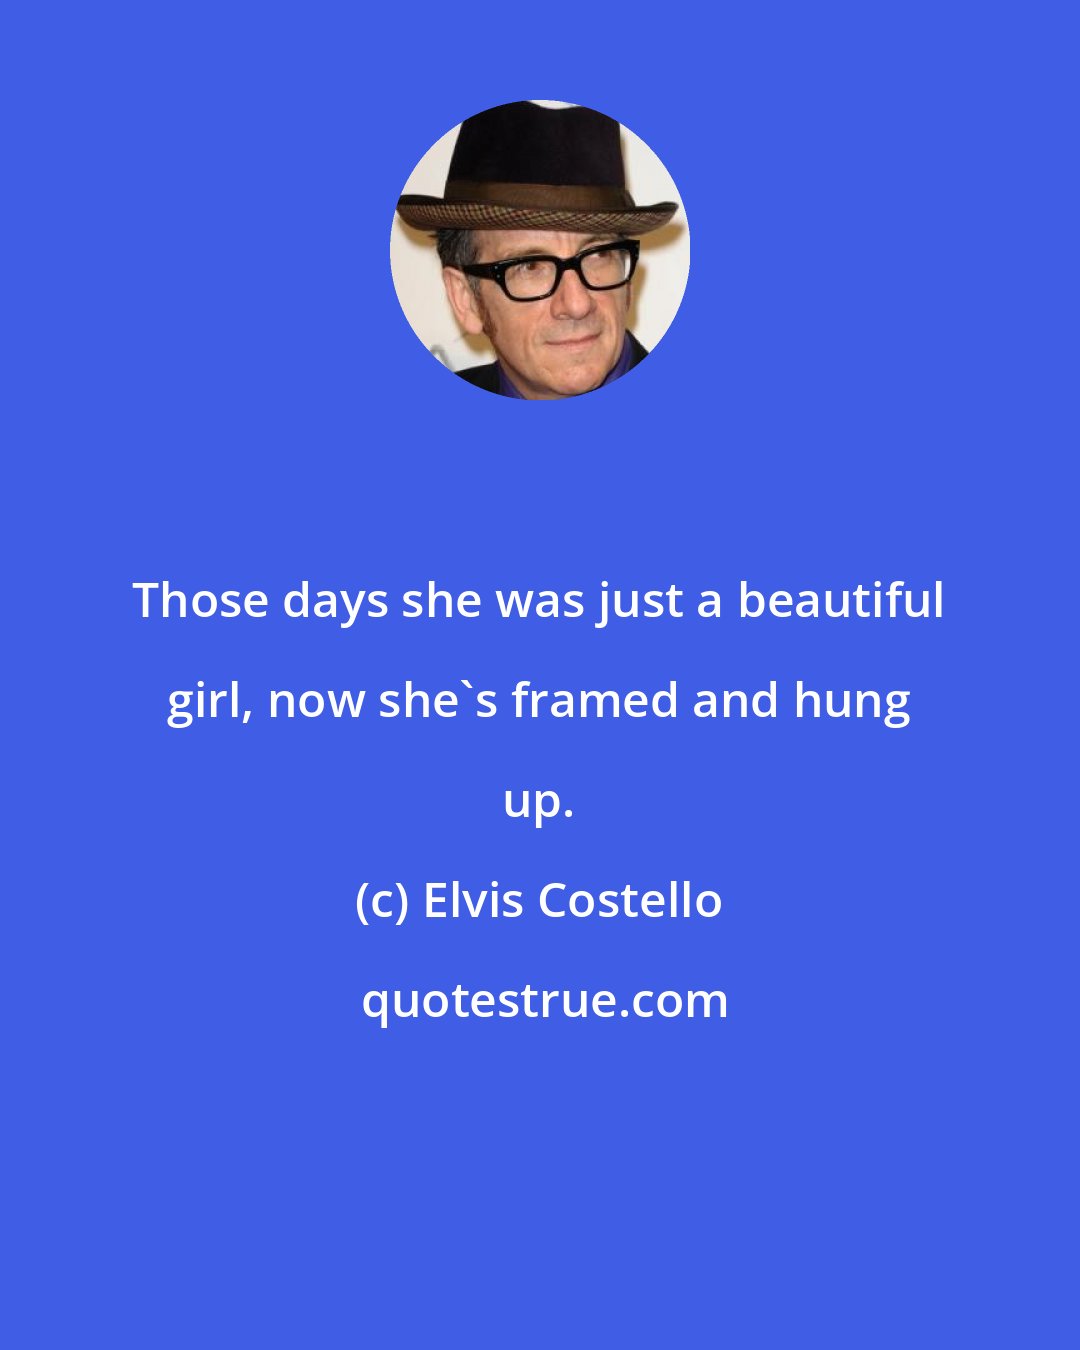 Elvis Costello: Those days she was just a beautiful girl, now she's framed and hung up.